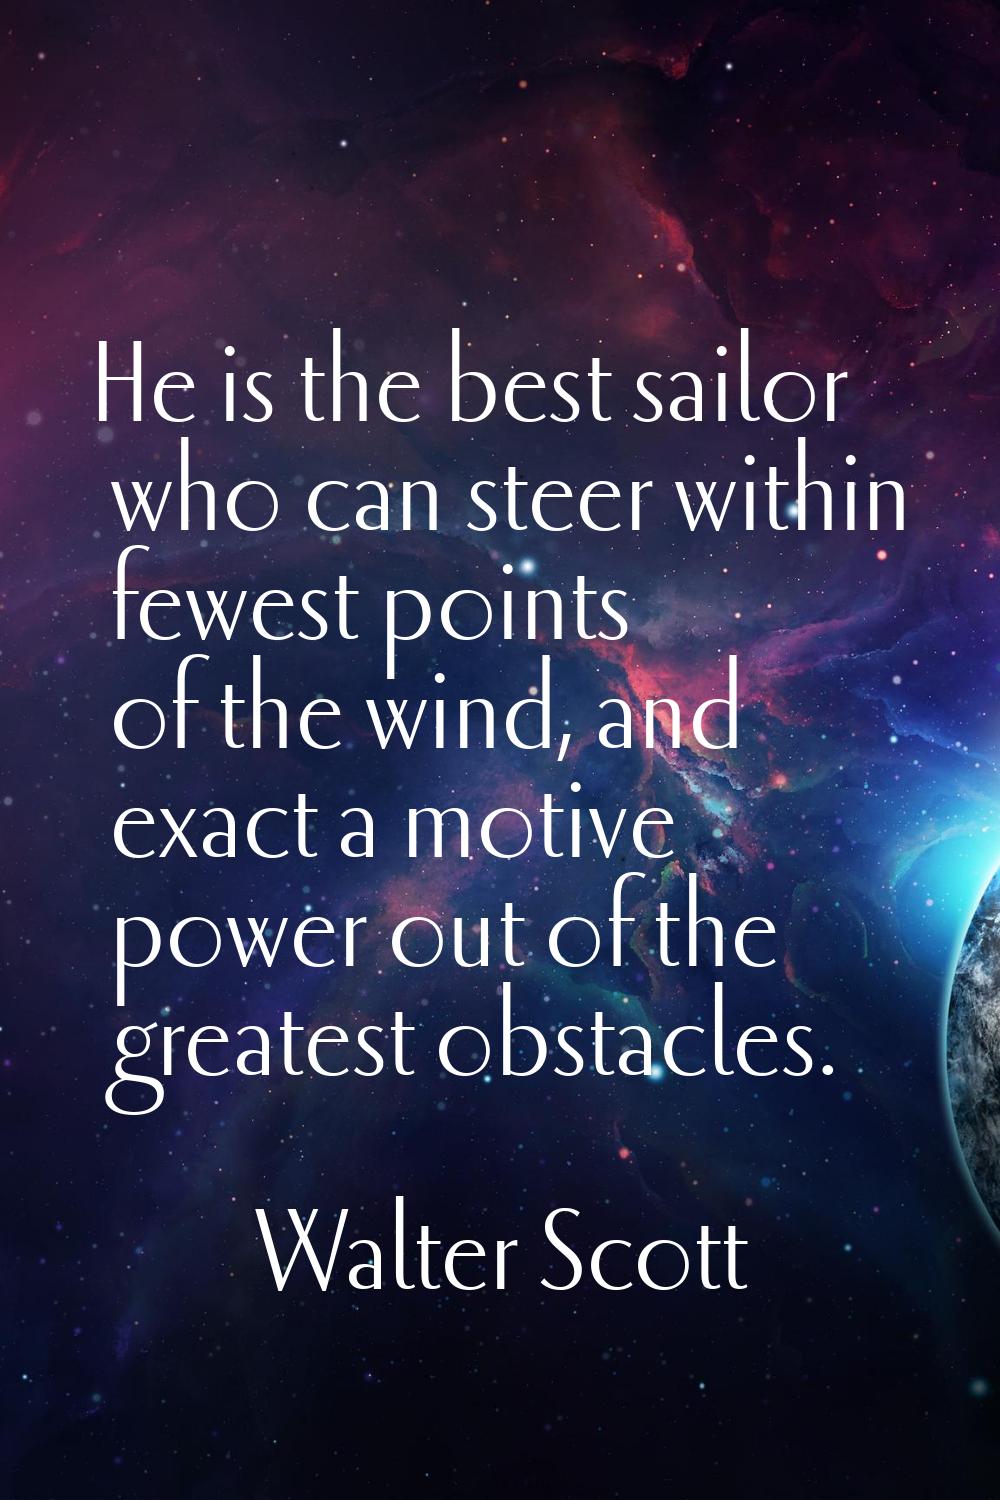 He is the best sailor who can steer within fewest points of the wind, and exact a motive power out 